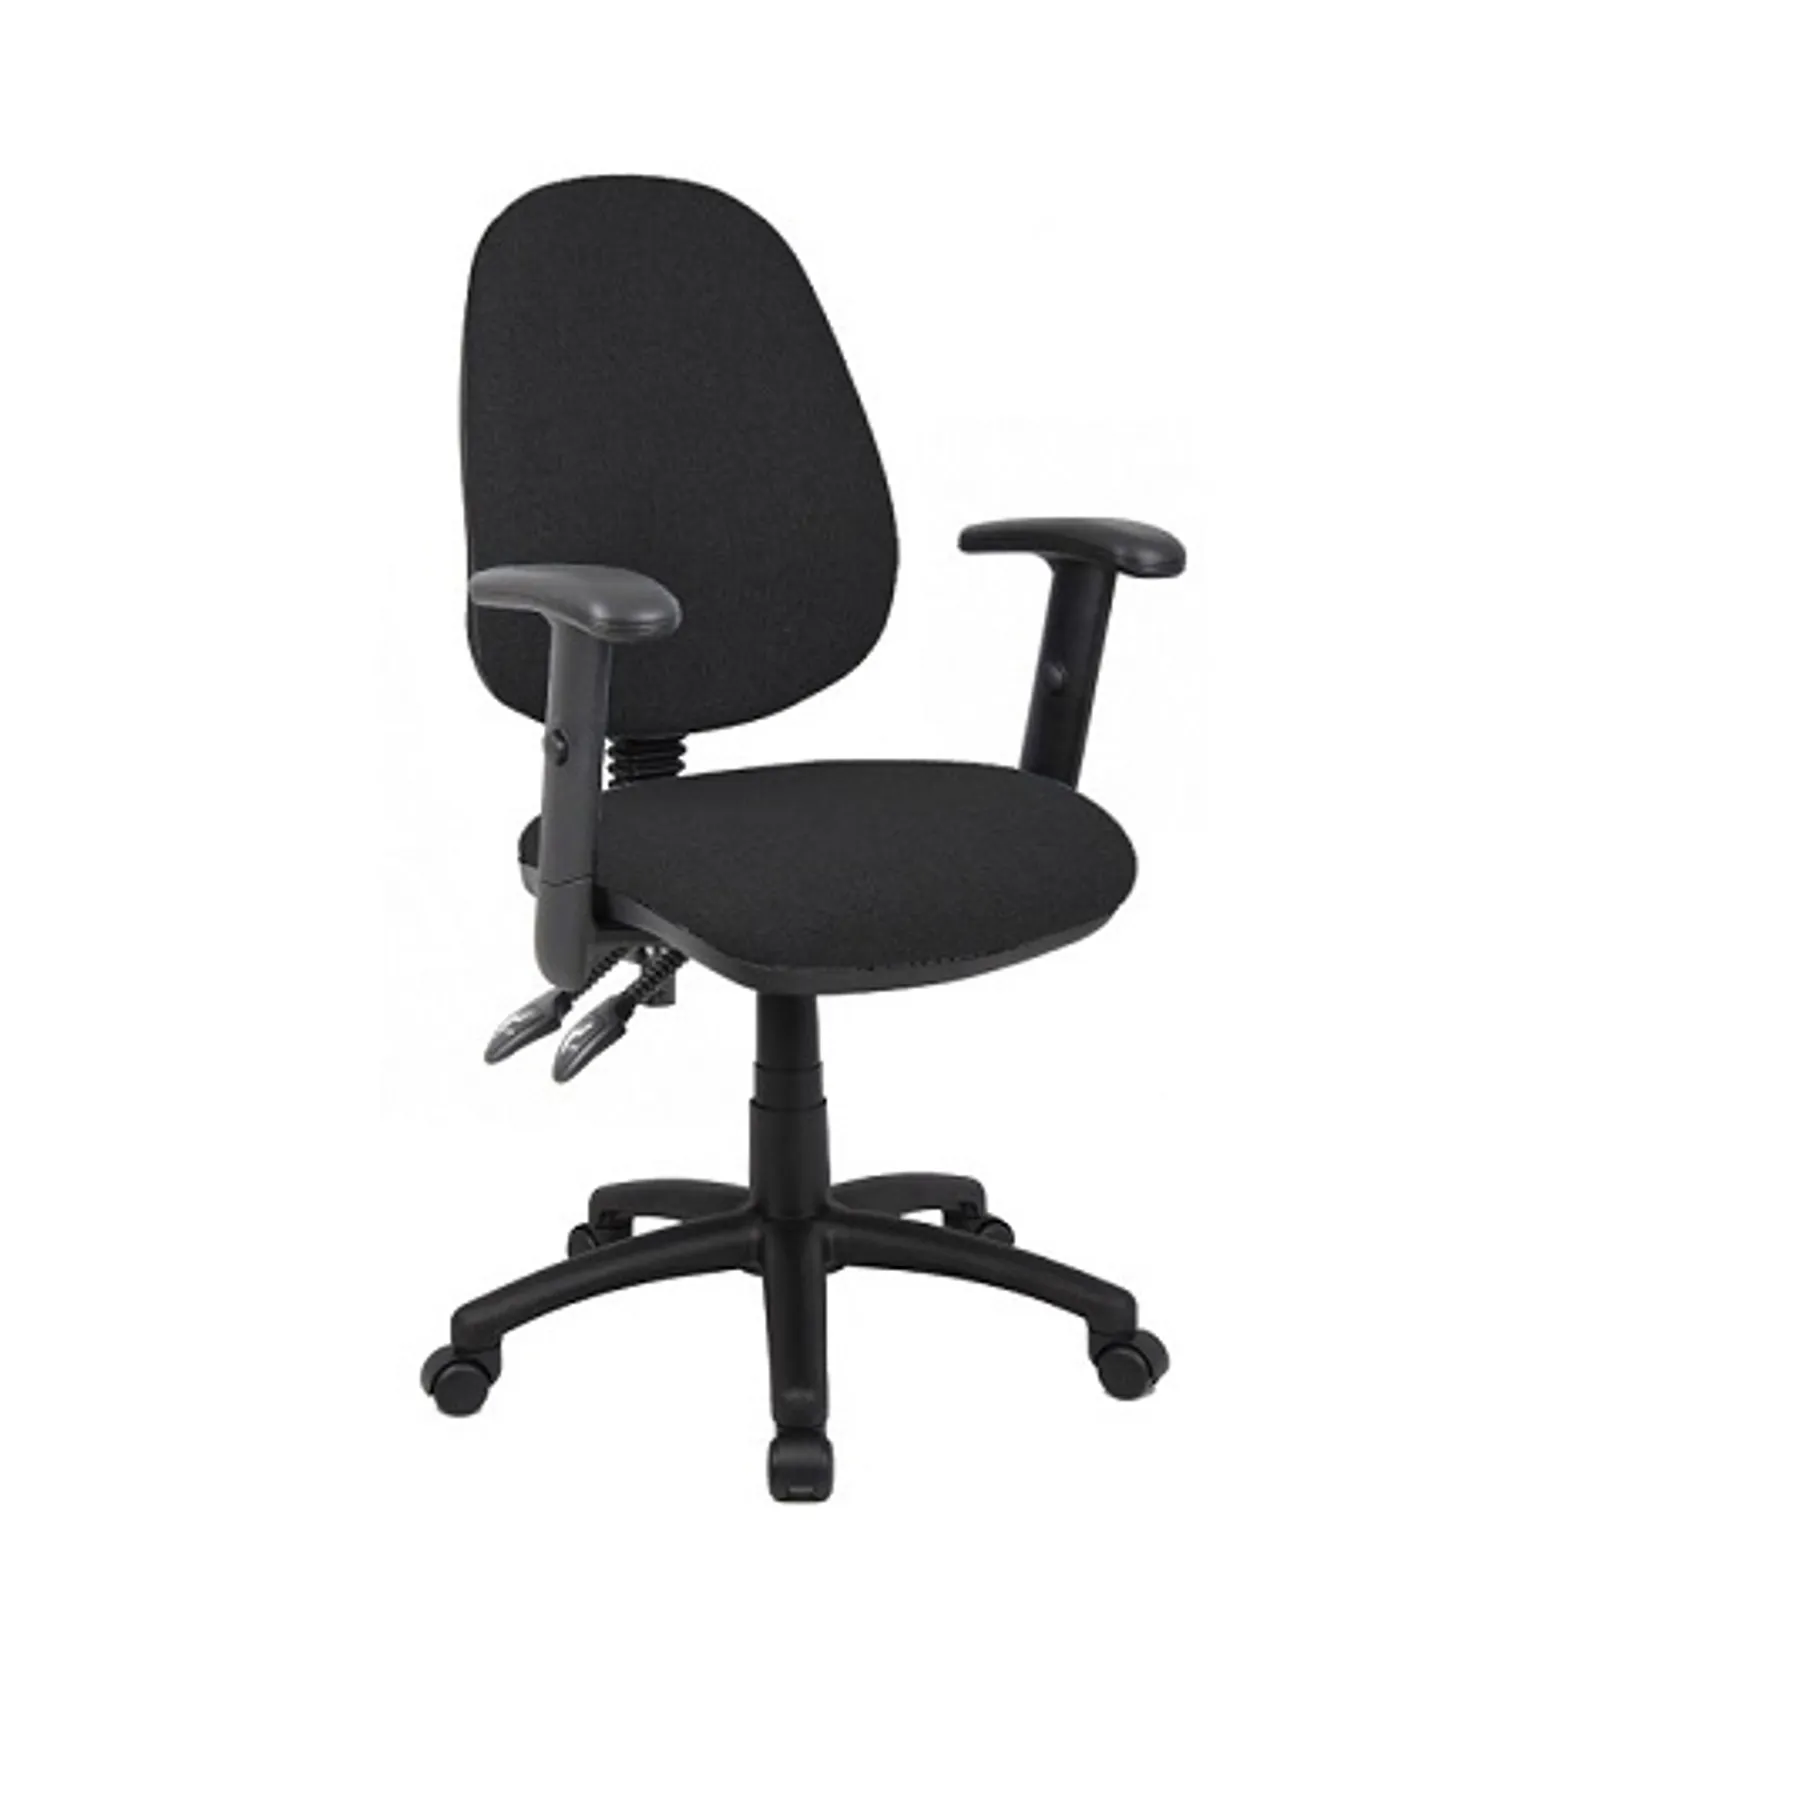 Lof direct dams vantage 100 operator chair with adjustable arms V102 00 K